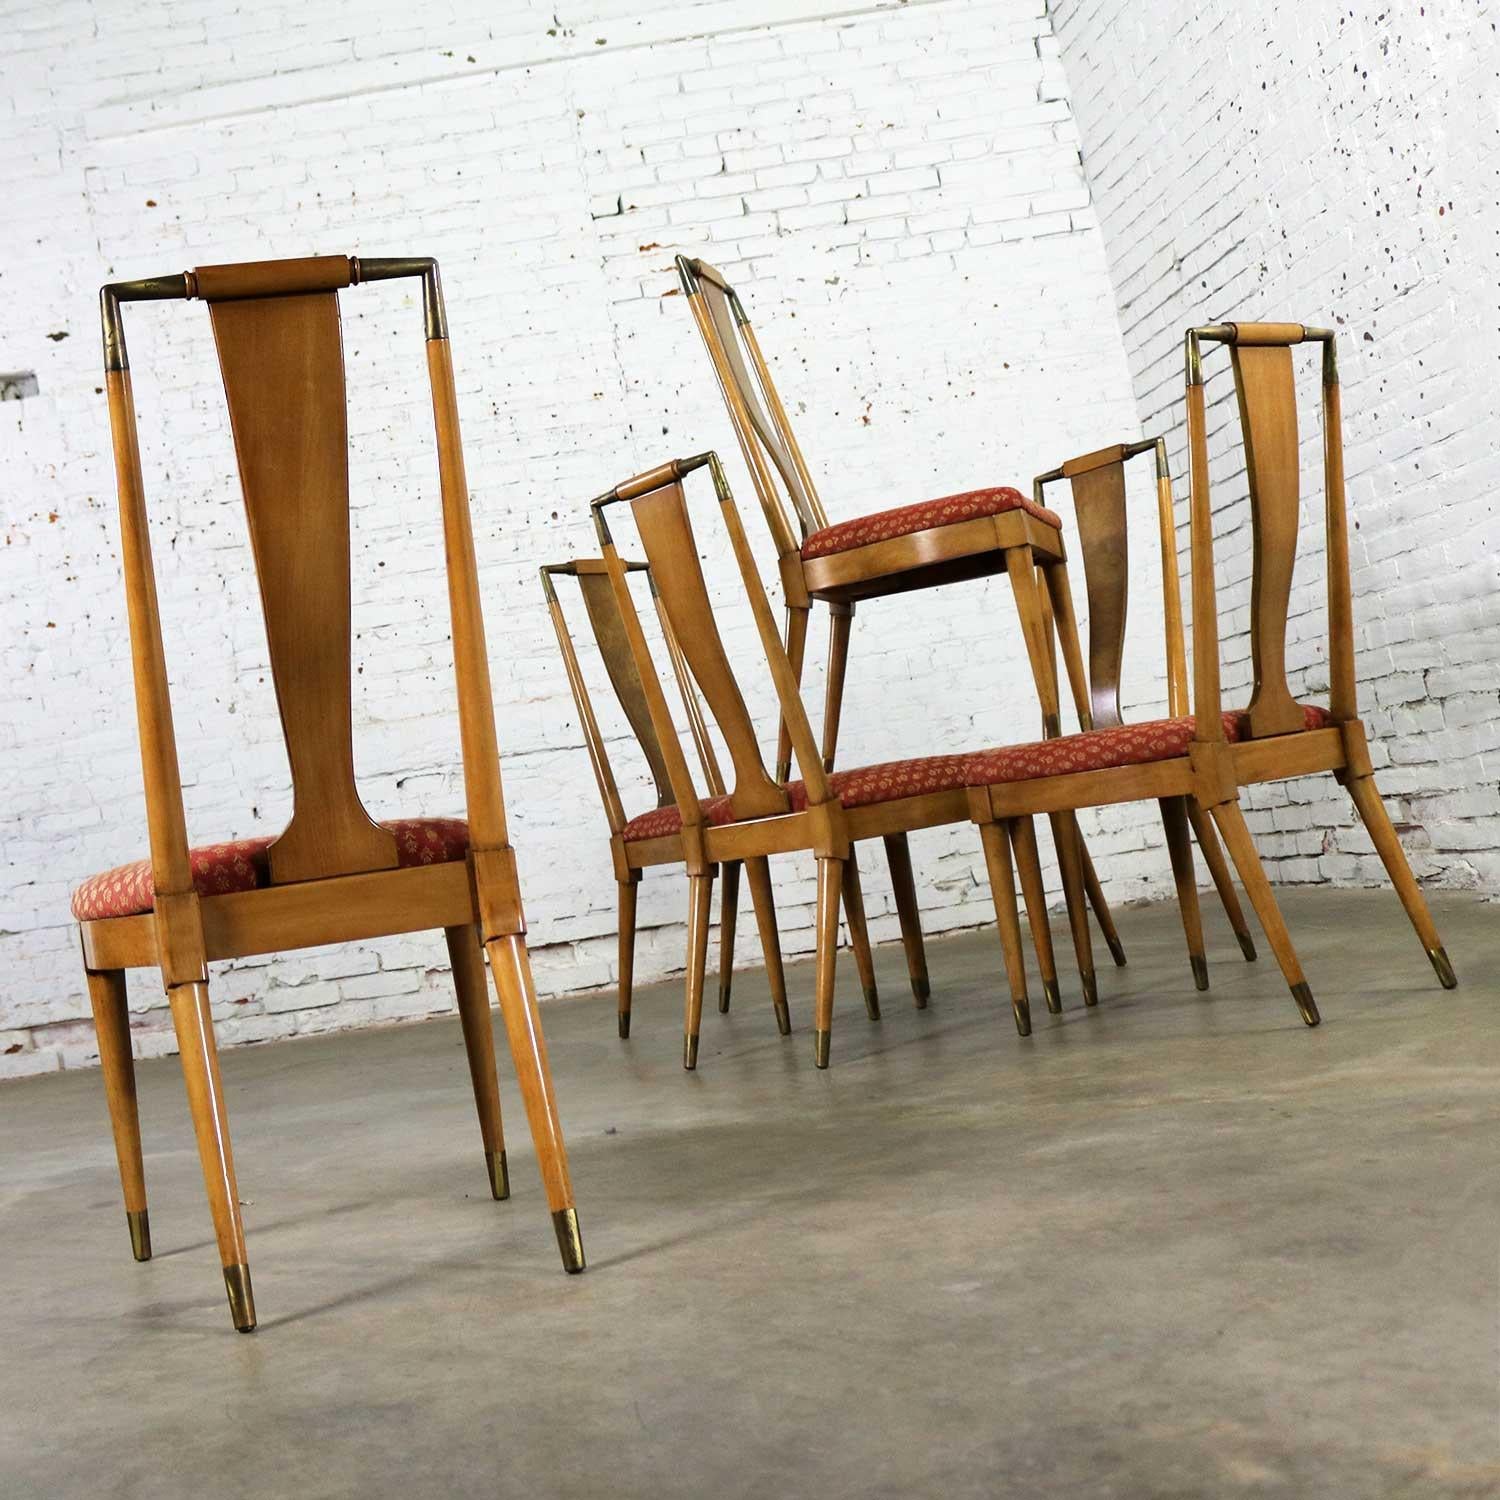 20th Century Midcentury Contempora Dining Chairs by William Clingman for J. L. Metz Set of 6 For Sale